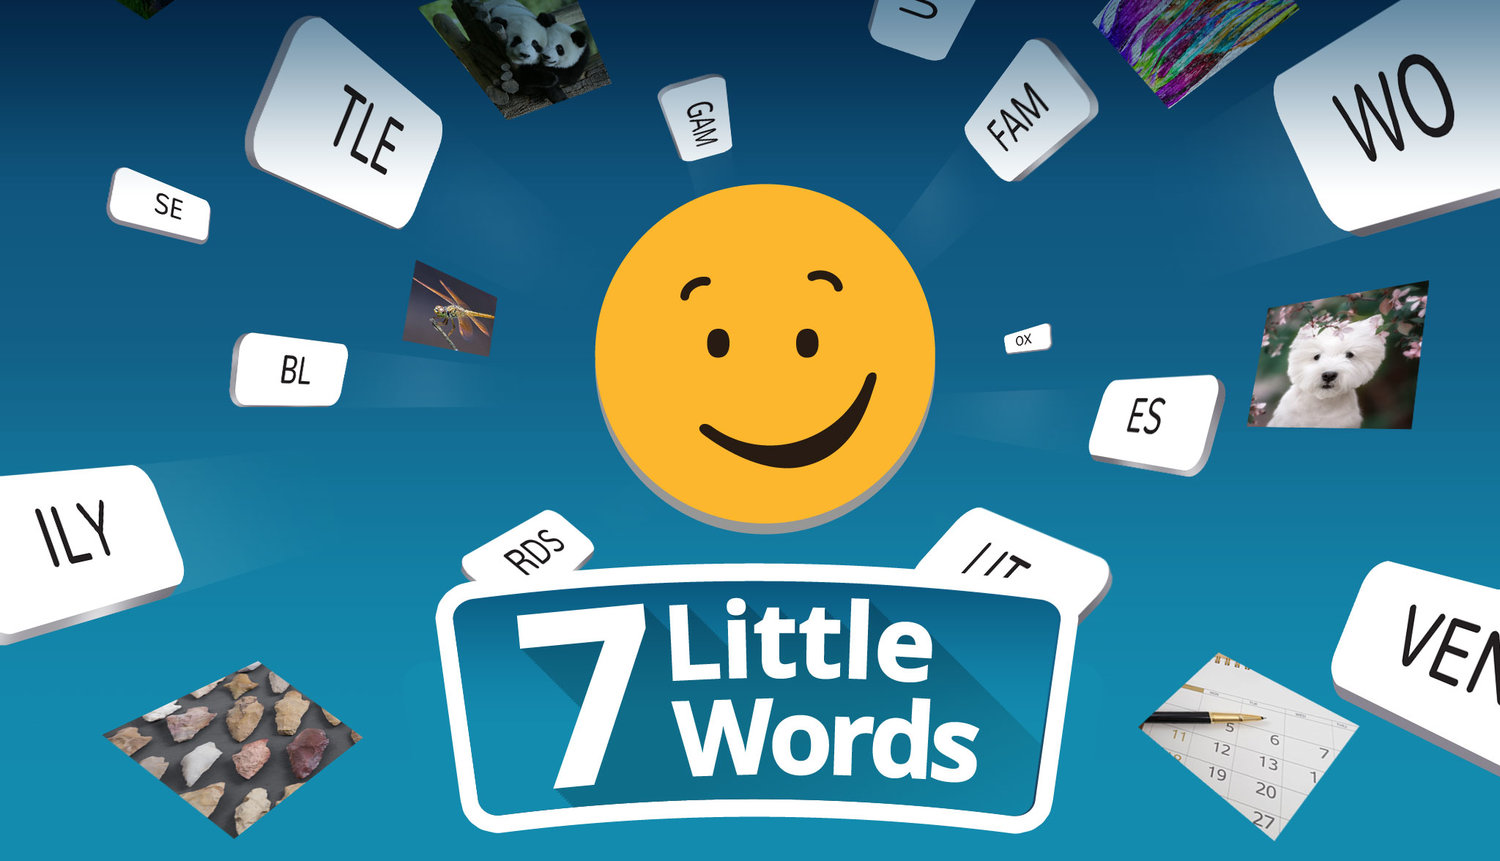 7 Little Words Crossword Clues and Answers July 8, 2023